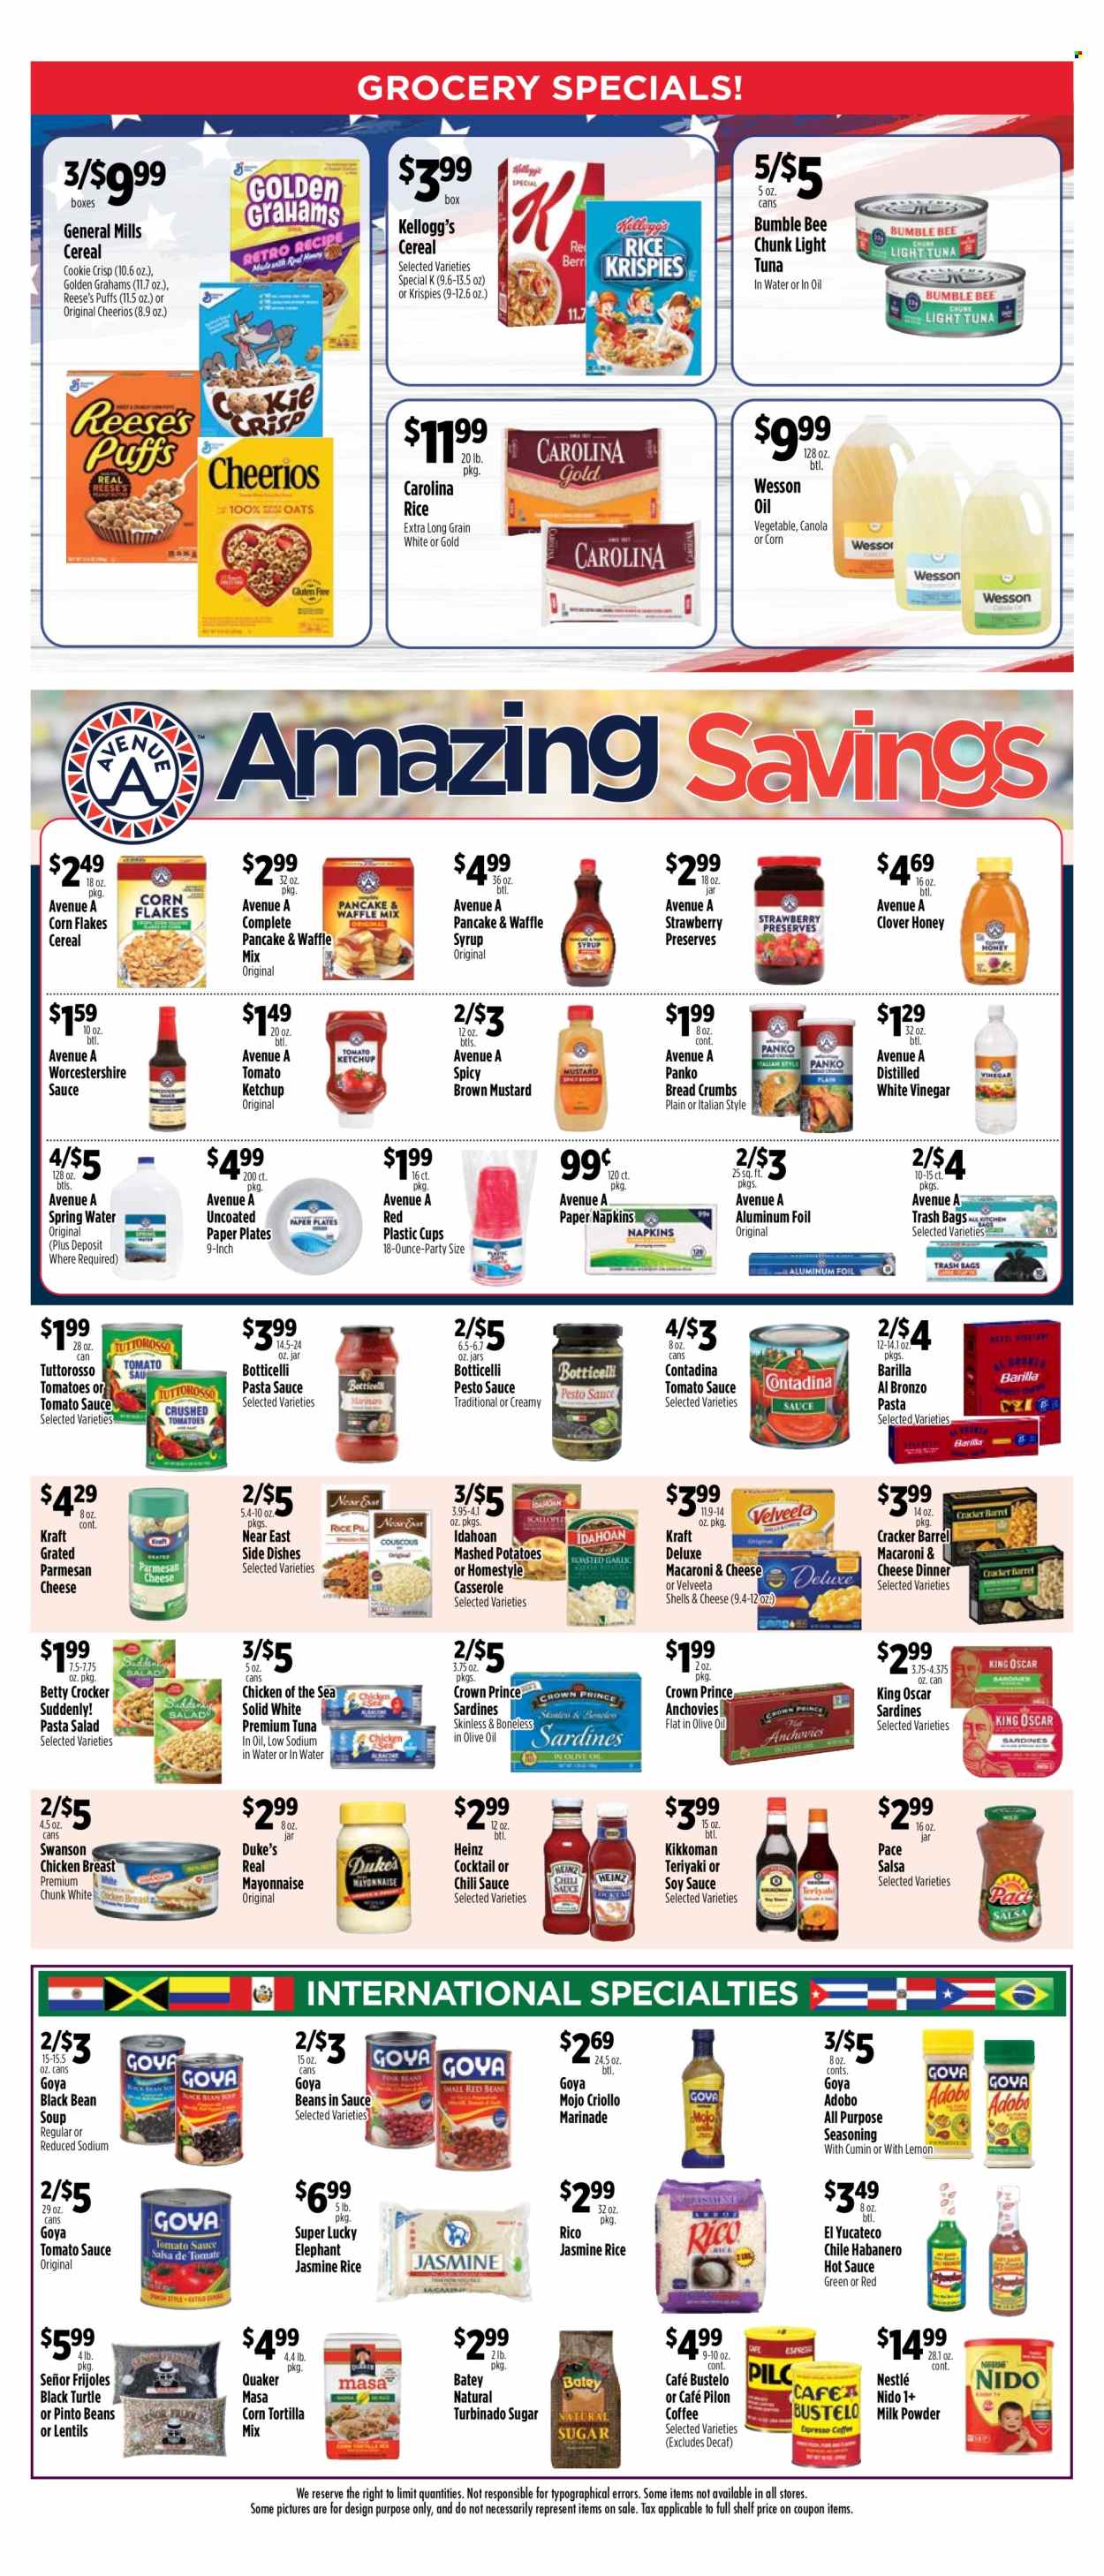 thumbnail - Pioneer Supermarkets Flyer - 06/30/2024 - 07/06/2024 - Sales products - corn tortillas, tortillas, puffs, breadcrumbs, panko breadcrumbs, pancake mix, sardines, tuna, macaroni & cheese, mashed potatoes, pasta sauce, soup, Bumble Bee, casserole, Barilla, Quaker, Kraft®, pasta salad, spaghetti sauce, ready meal, chicken breasts, anchovies, parmesan, grated cheese, Velveeta, milk powder, mayonnaise, Reese's, cookies, Nestlé, Kellogg's, General Mills, canned tomatoes, canned tuna, lentils, tomato sauce, Heinz, pinto beans, light tuna, Chicken of the Sea, Goya, canned fish, cereals, Cheerios, corn flakes, jasmine rice, cumin, seasoning, adobo sauce, mustard, soy sauce, worcestershire sauce, hot sauce, ketchup, chilli sauce, Kikkoman, salsa, marinade, vinegar, syrup, spring water, coffee, napkins, trash bags, aluminium foil, paper plate, plastic cup. Page 2.